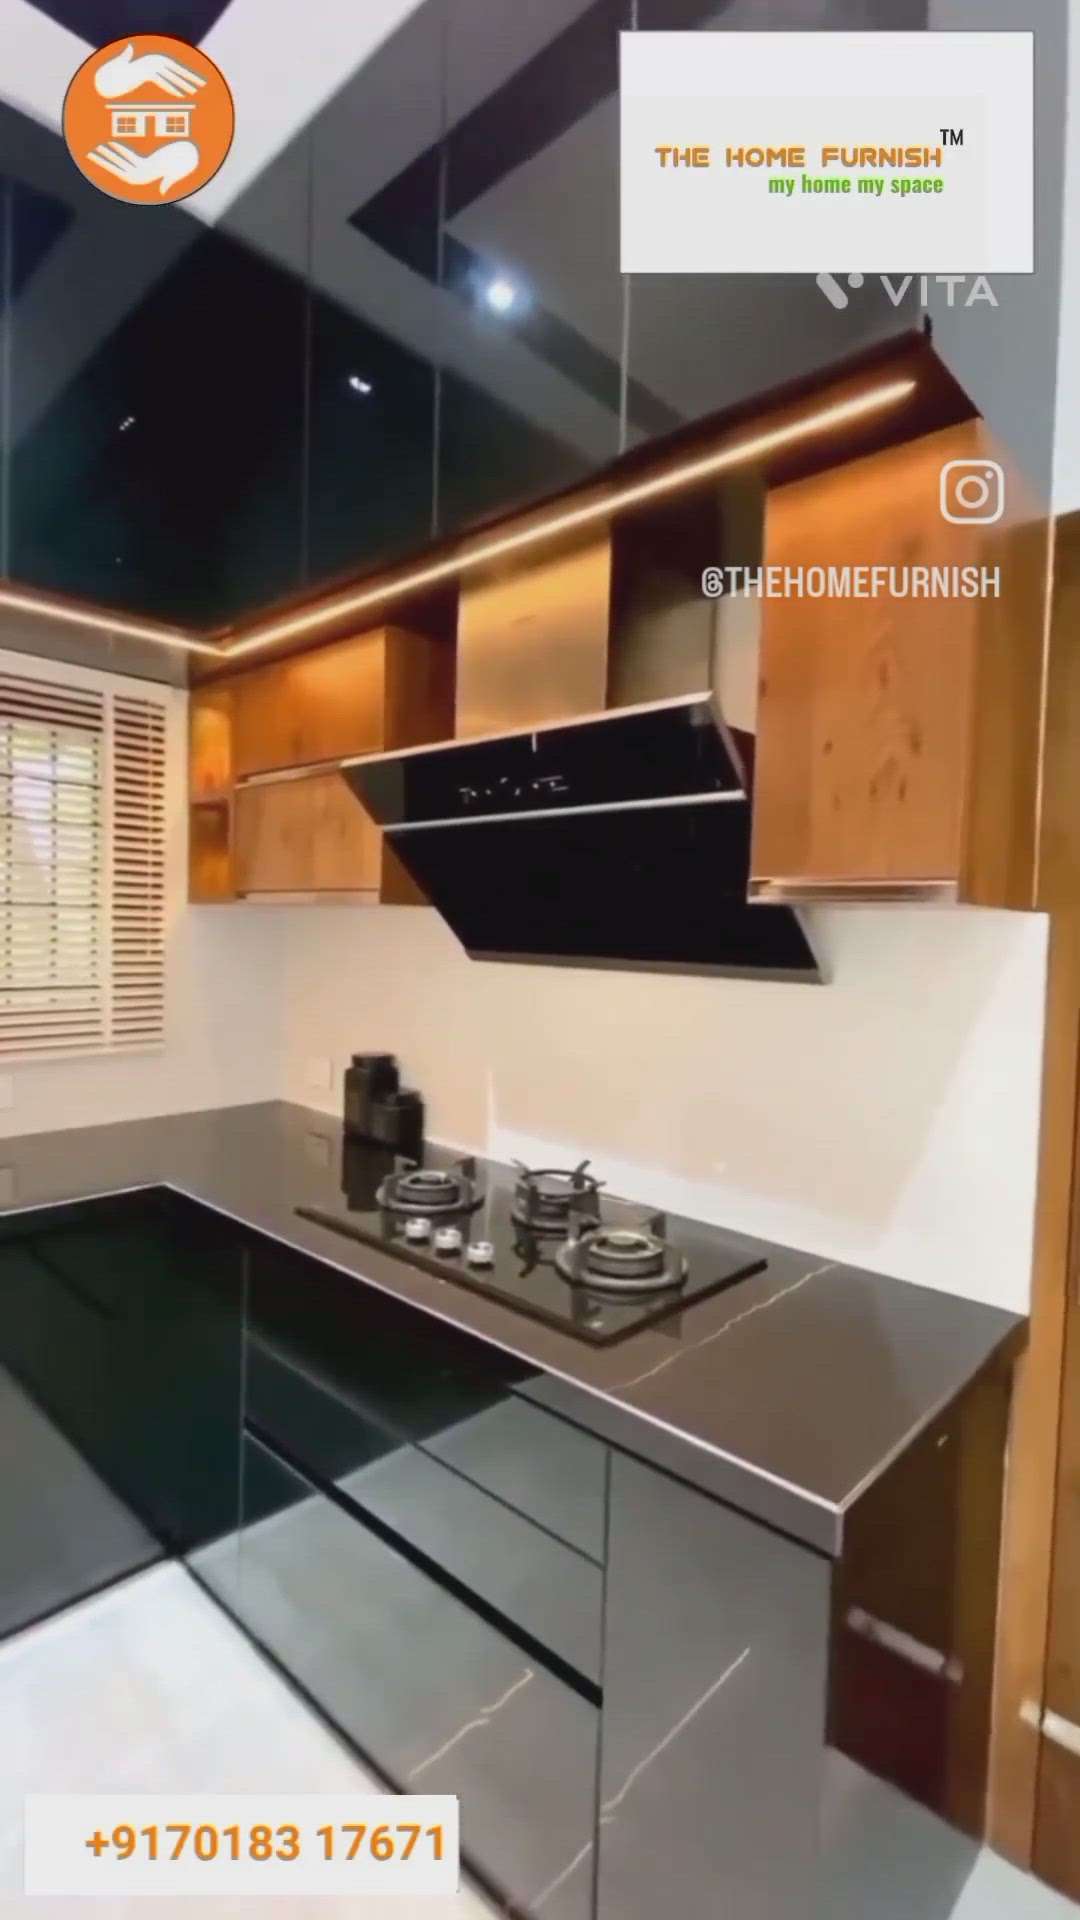 Next Generation Kitchen! Italian Kitchen in Indian Style...Exclusive collection of Modular Kitchen designs at THE HOME FURNISH.  Explore the latest modular kitchen designs & consultations. Inquiry Please Contact! https://wa.me/c/917018317671
#kitchen #modularkitchen #chimney #kitchendesign #kitcheninteriordesign #kitchendesignideas  #interiordesigner #interiordesigner #interiordecorating #interiordesign #interiors #architecture #architecturedesign #architect #LivingroomDesigns  #badroominterior  #thehomefurnish